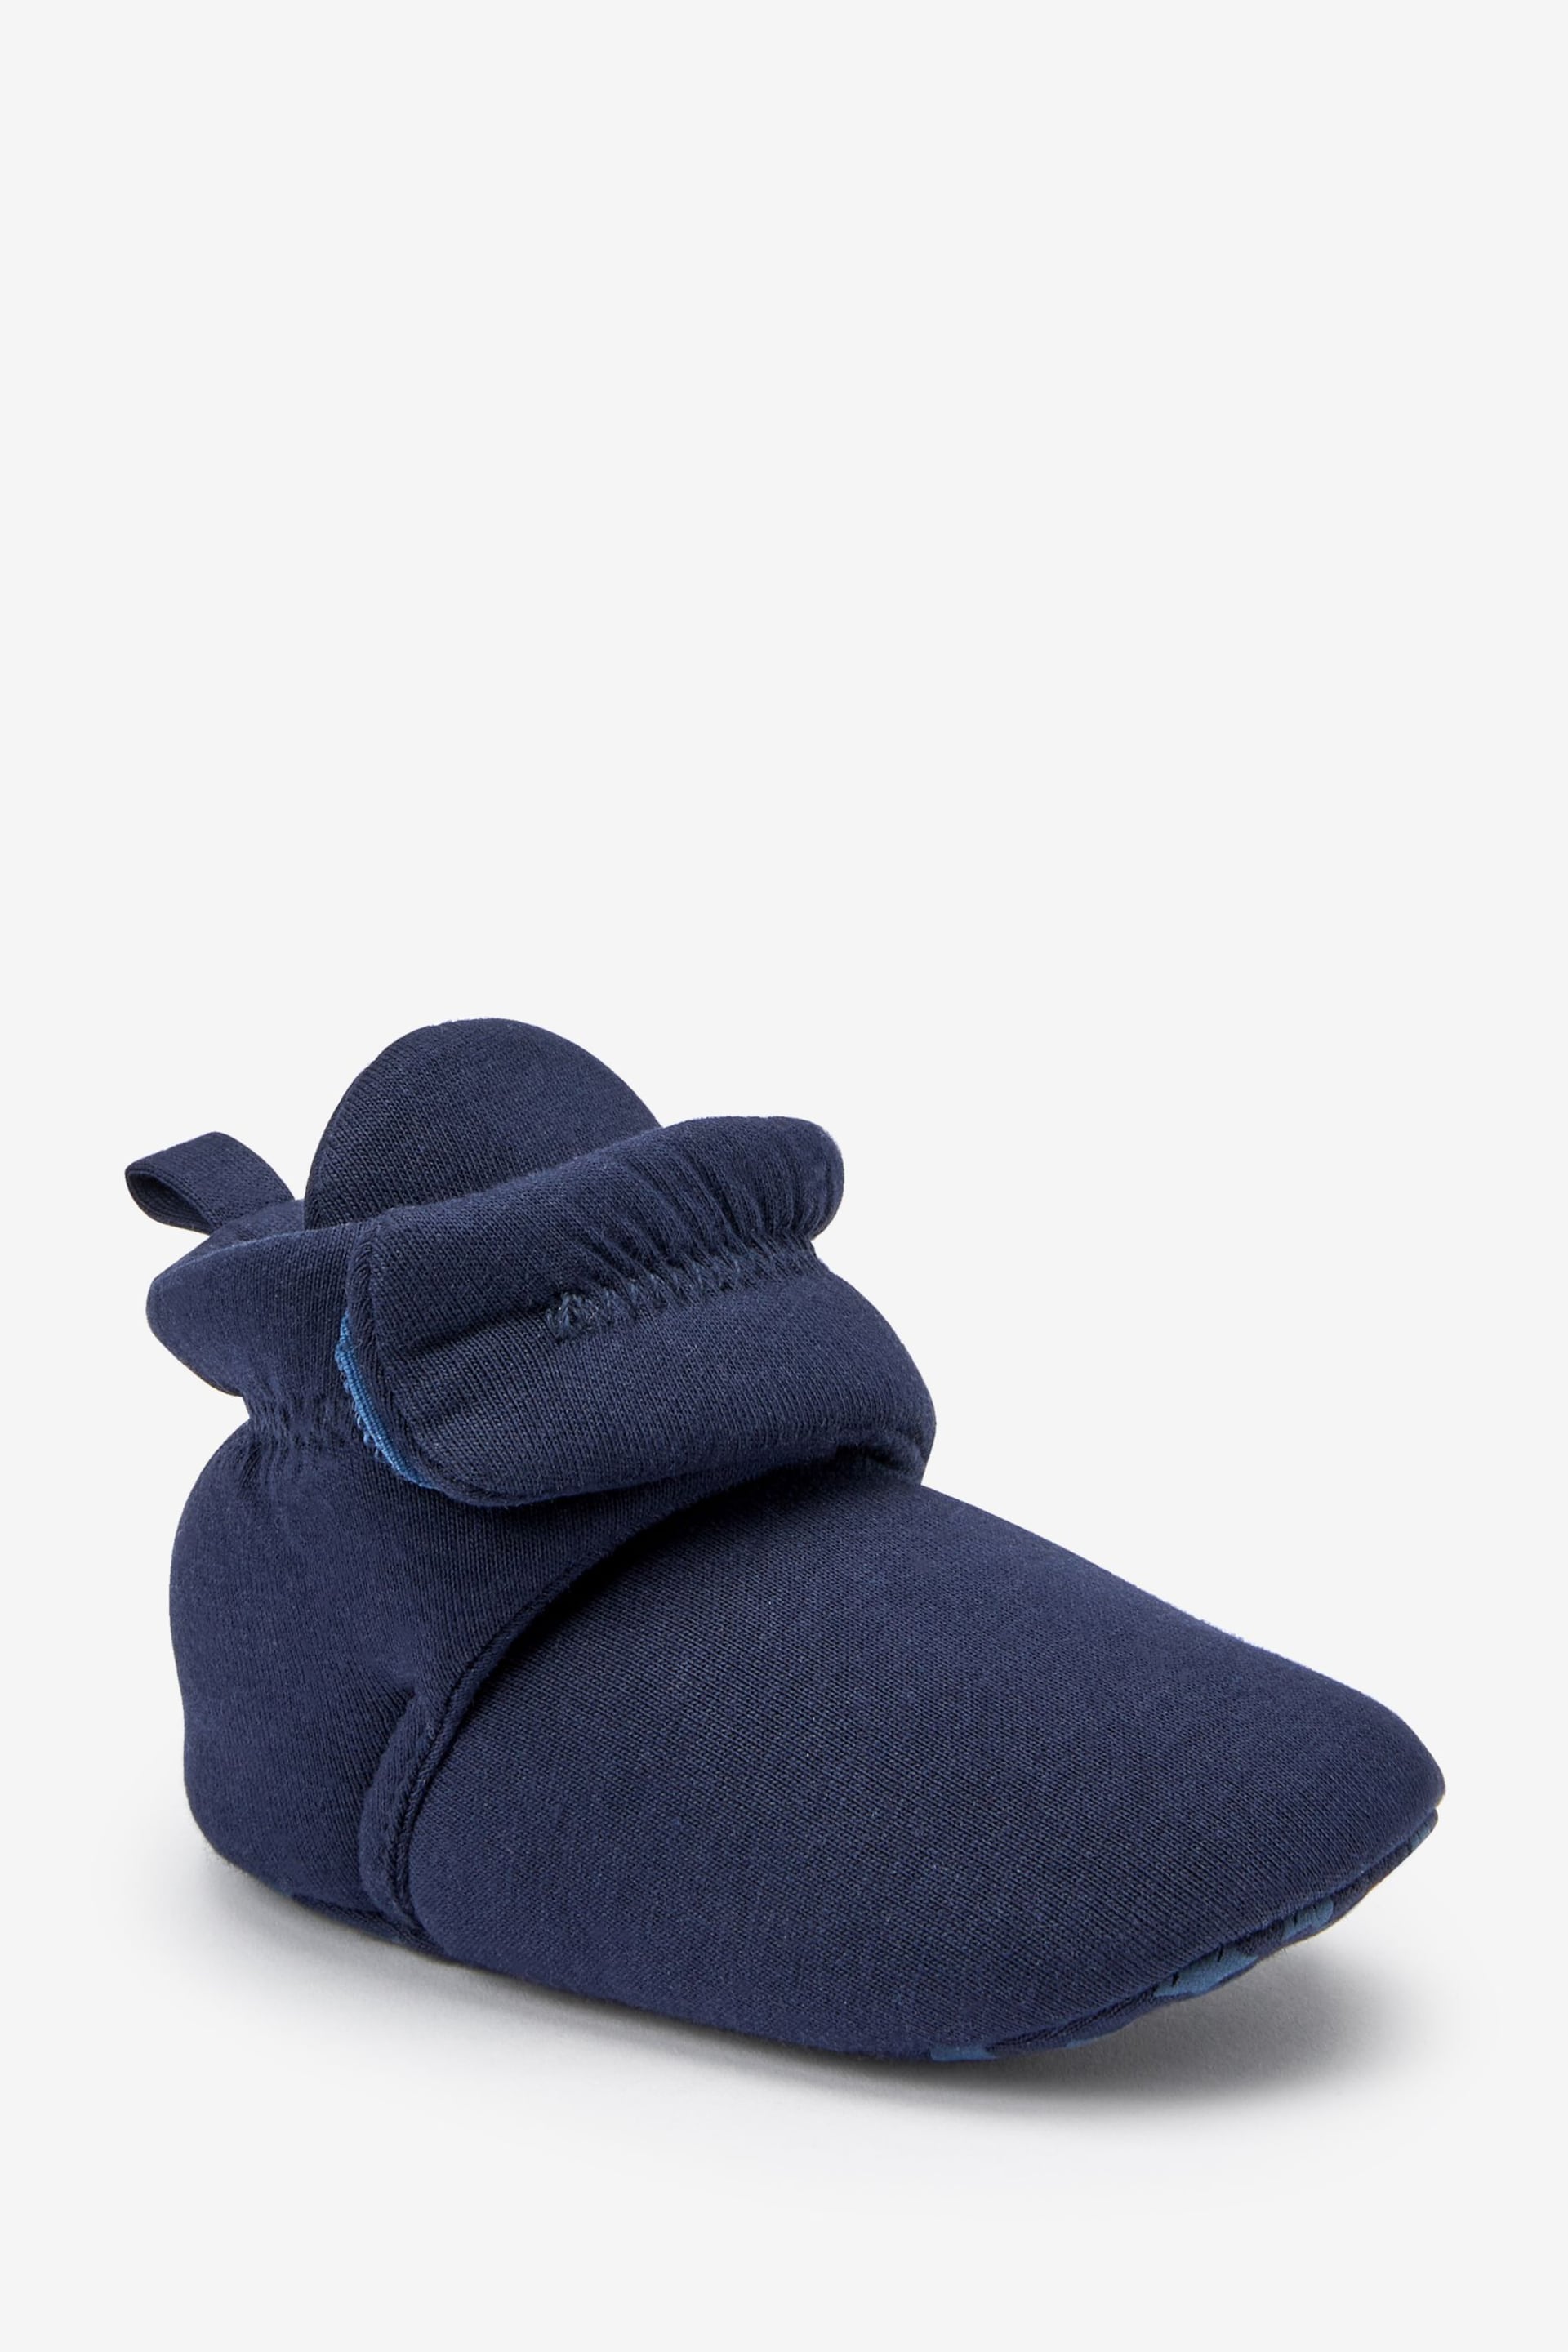 Navy Blue Cosy Baby Boots (0-24mths) - Image 2 of 5